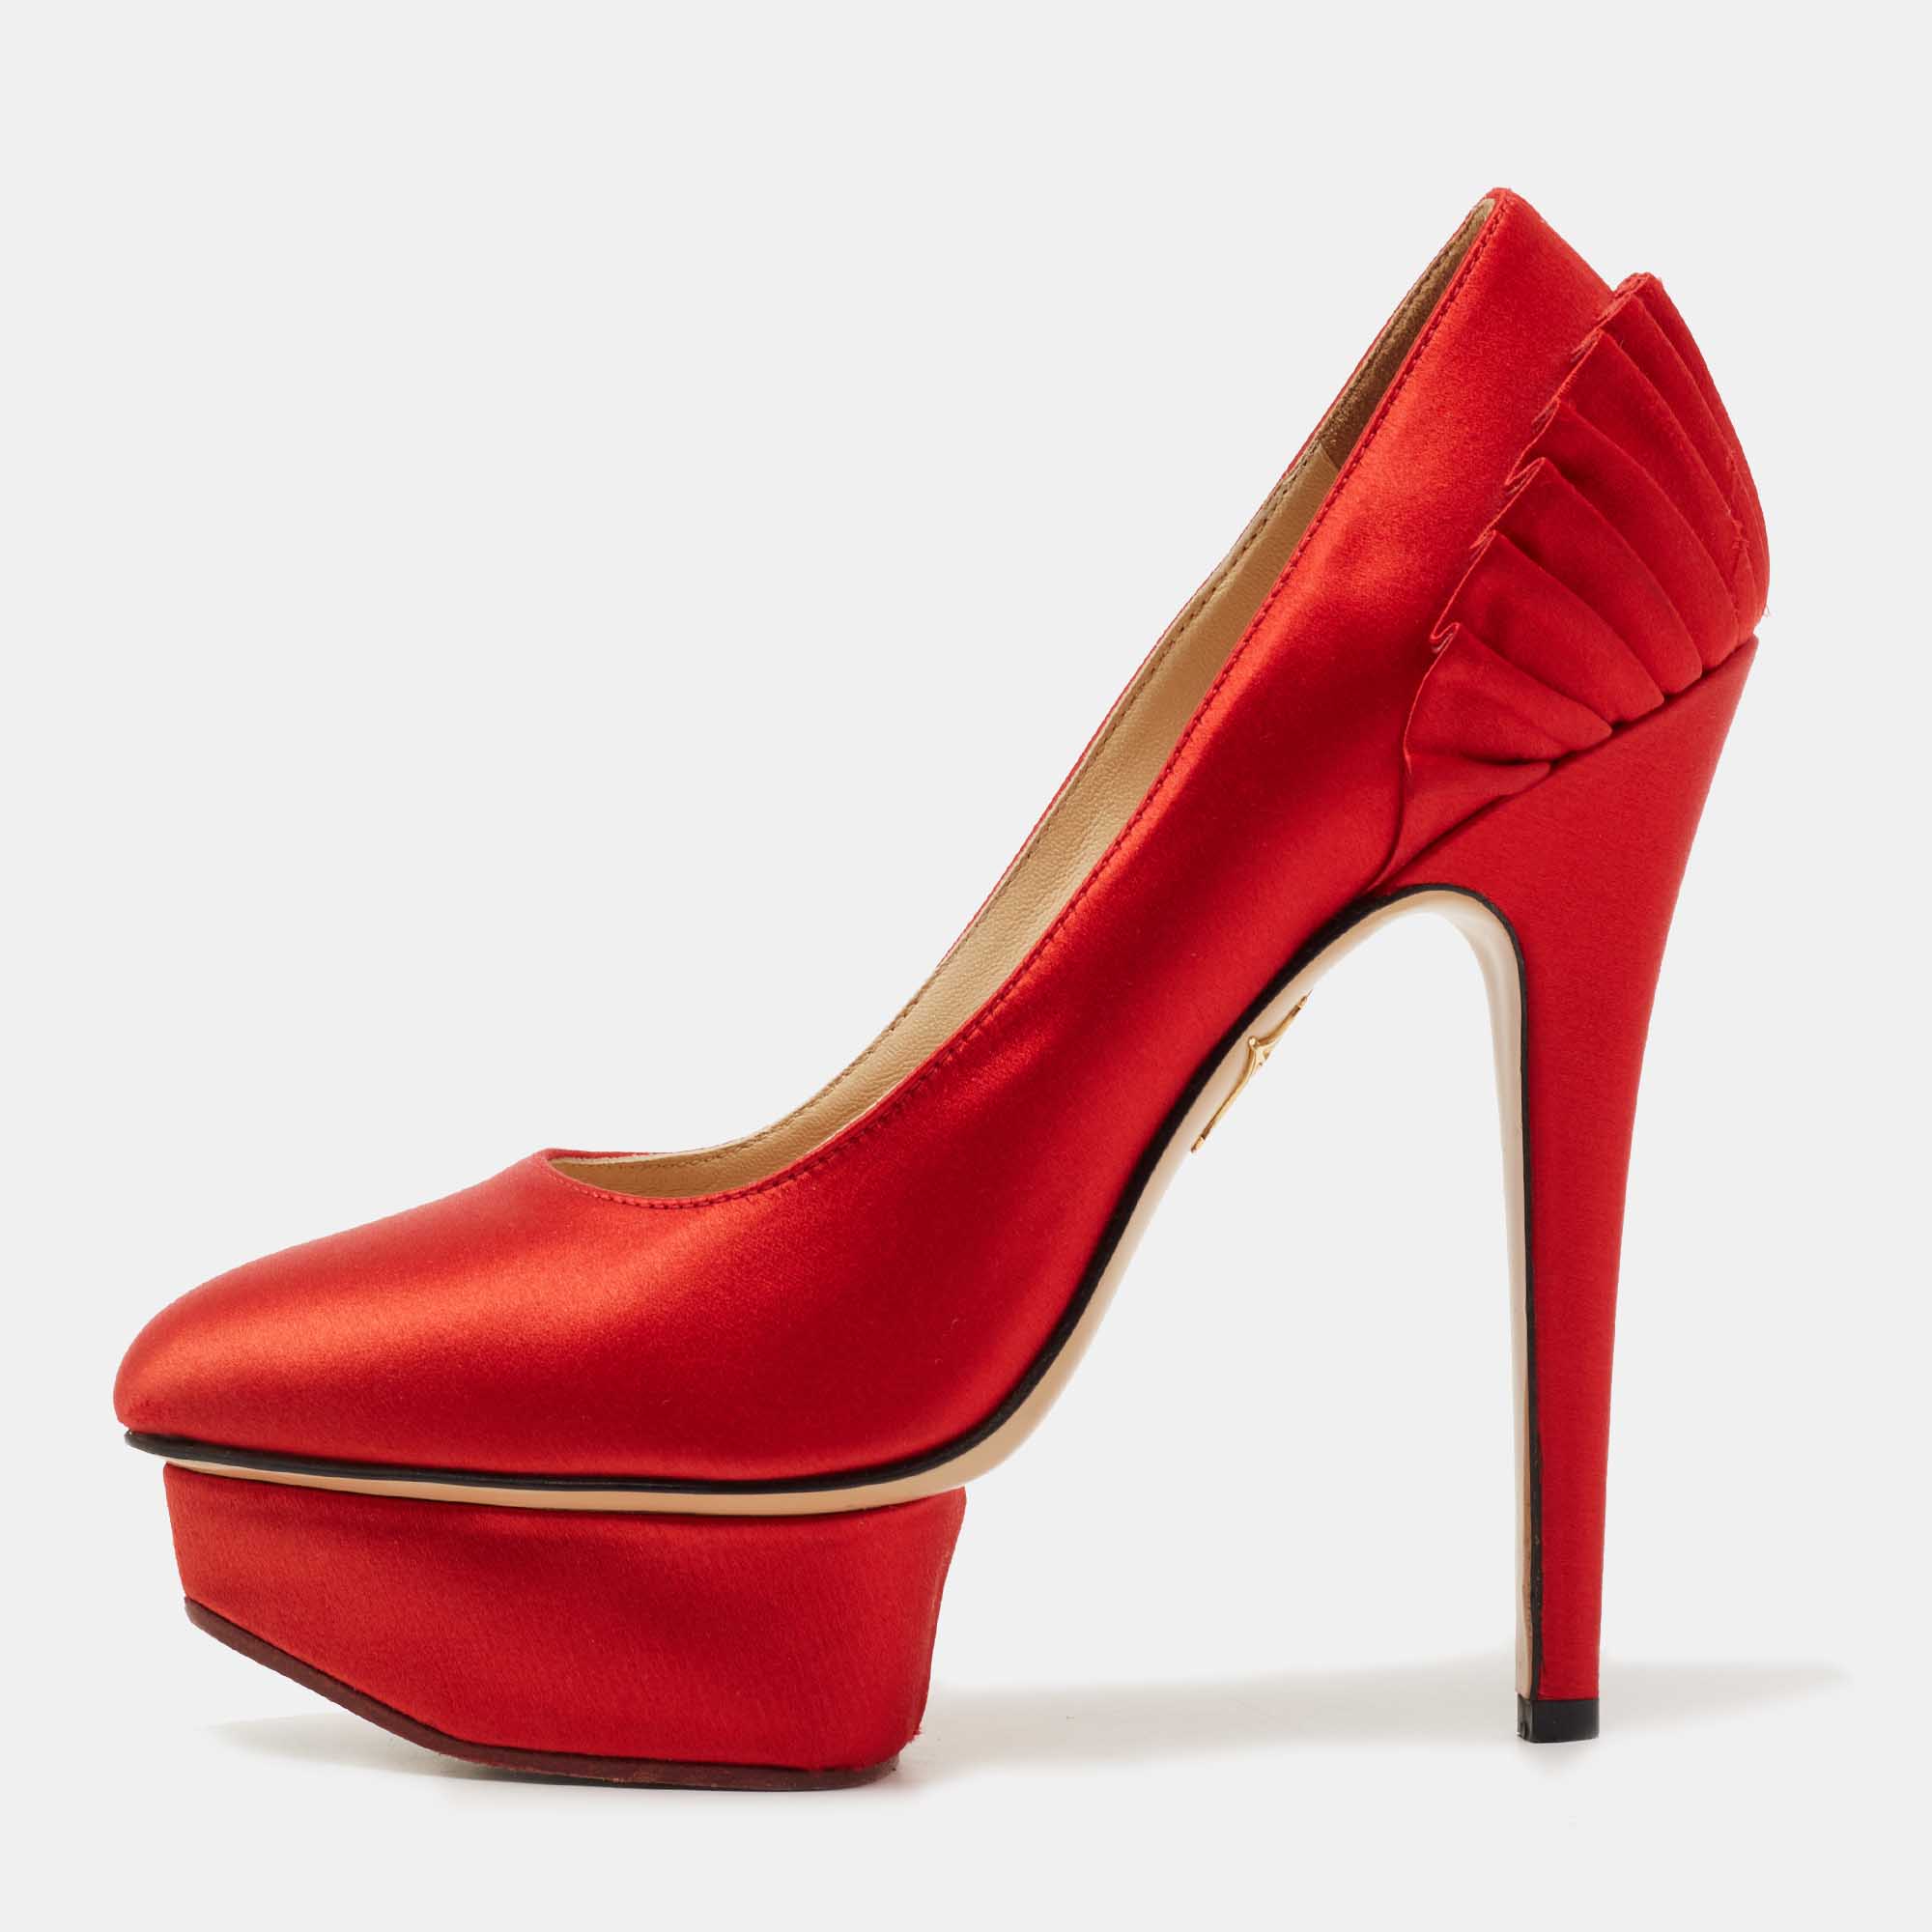 Pre-owned Charlotte Olympia Red Satin Paloma Fan Pleat Pumps Size 35.5